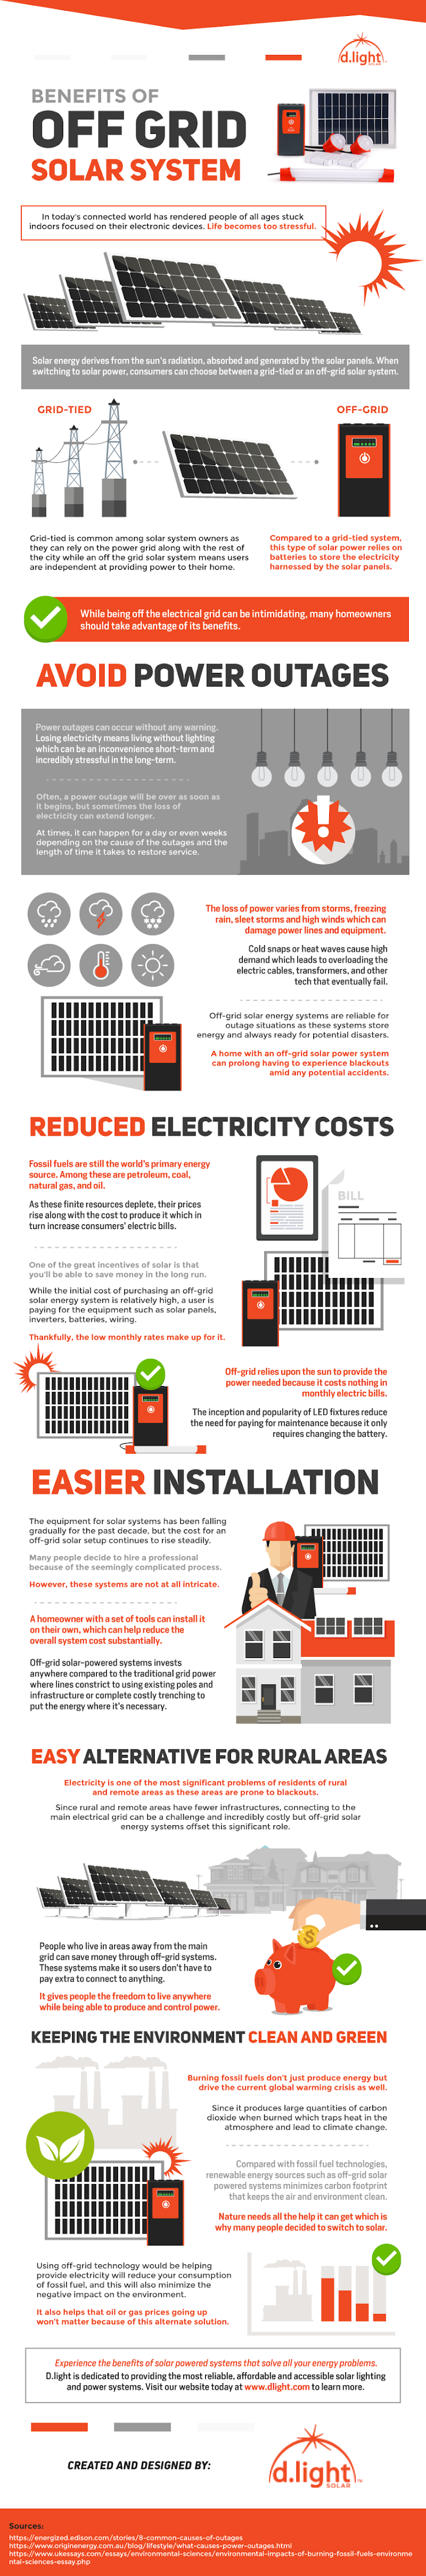 Benefits of Off-Grid Solar System #infographic